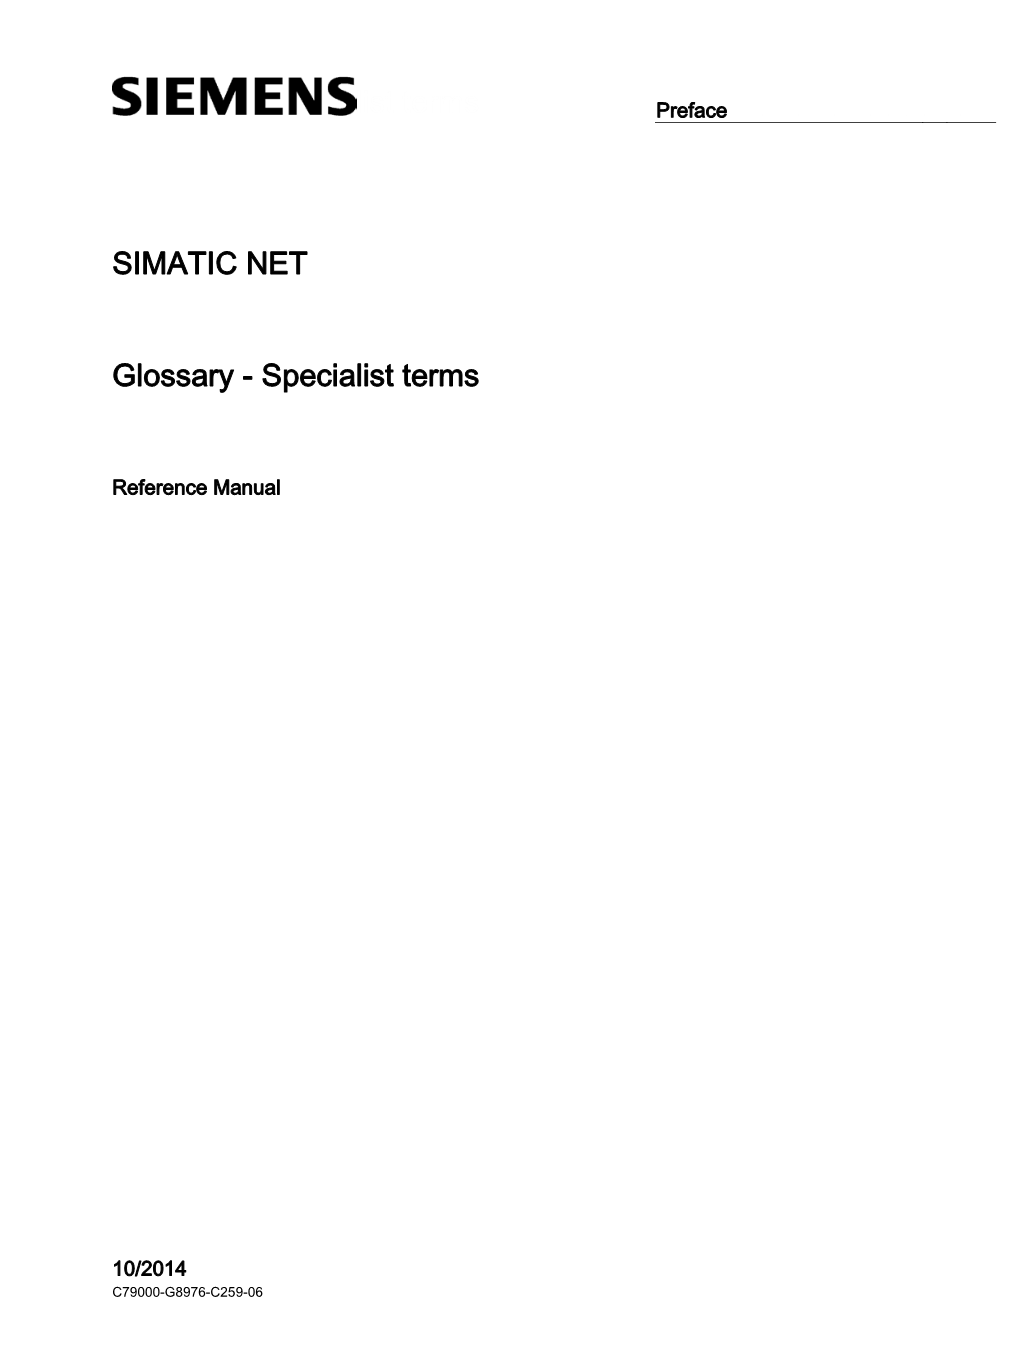 Glossary - Specialist Terms ______Preface